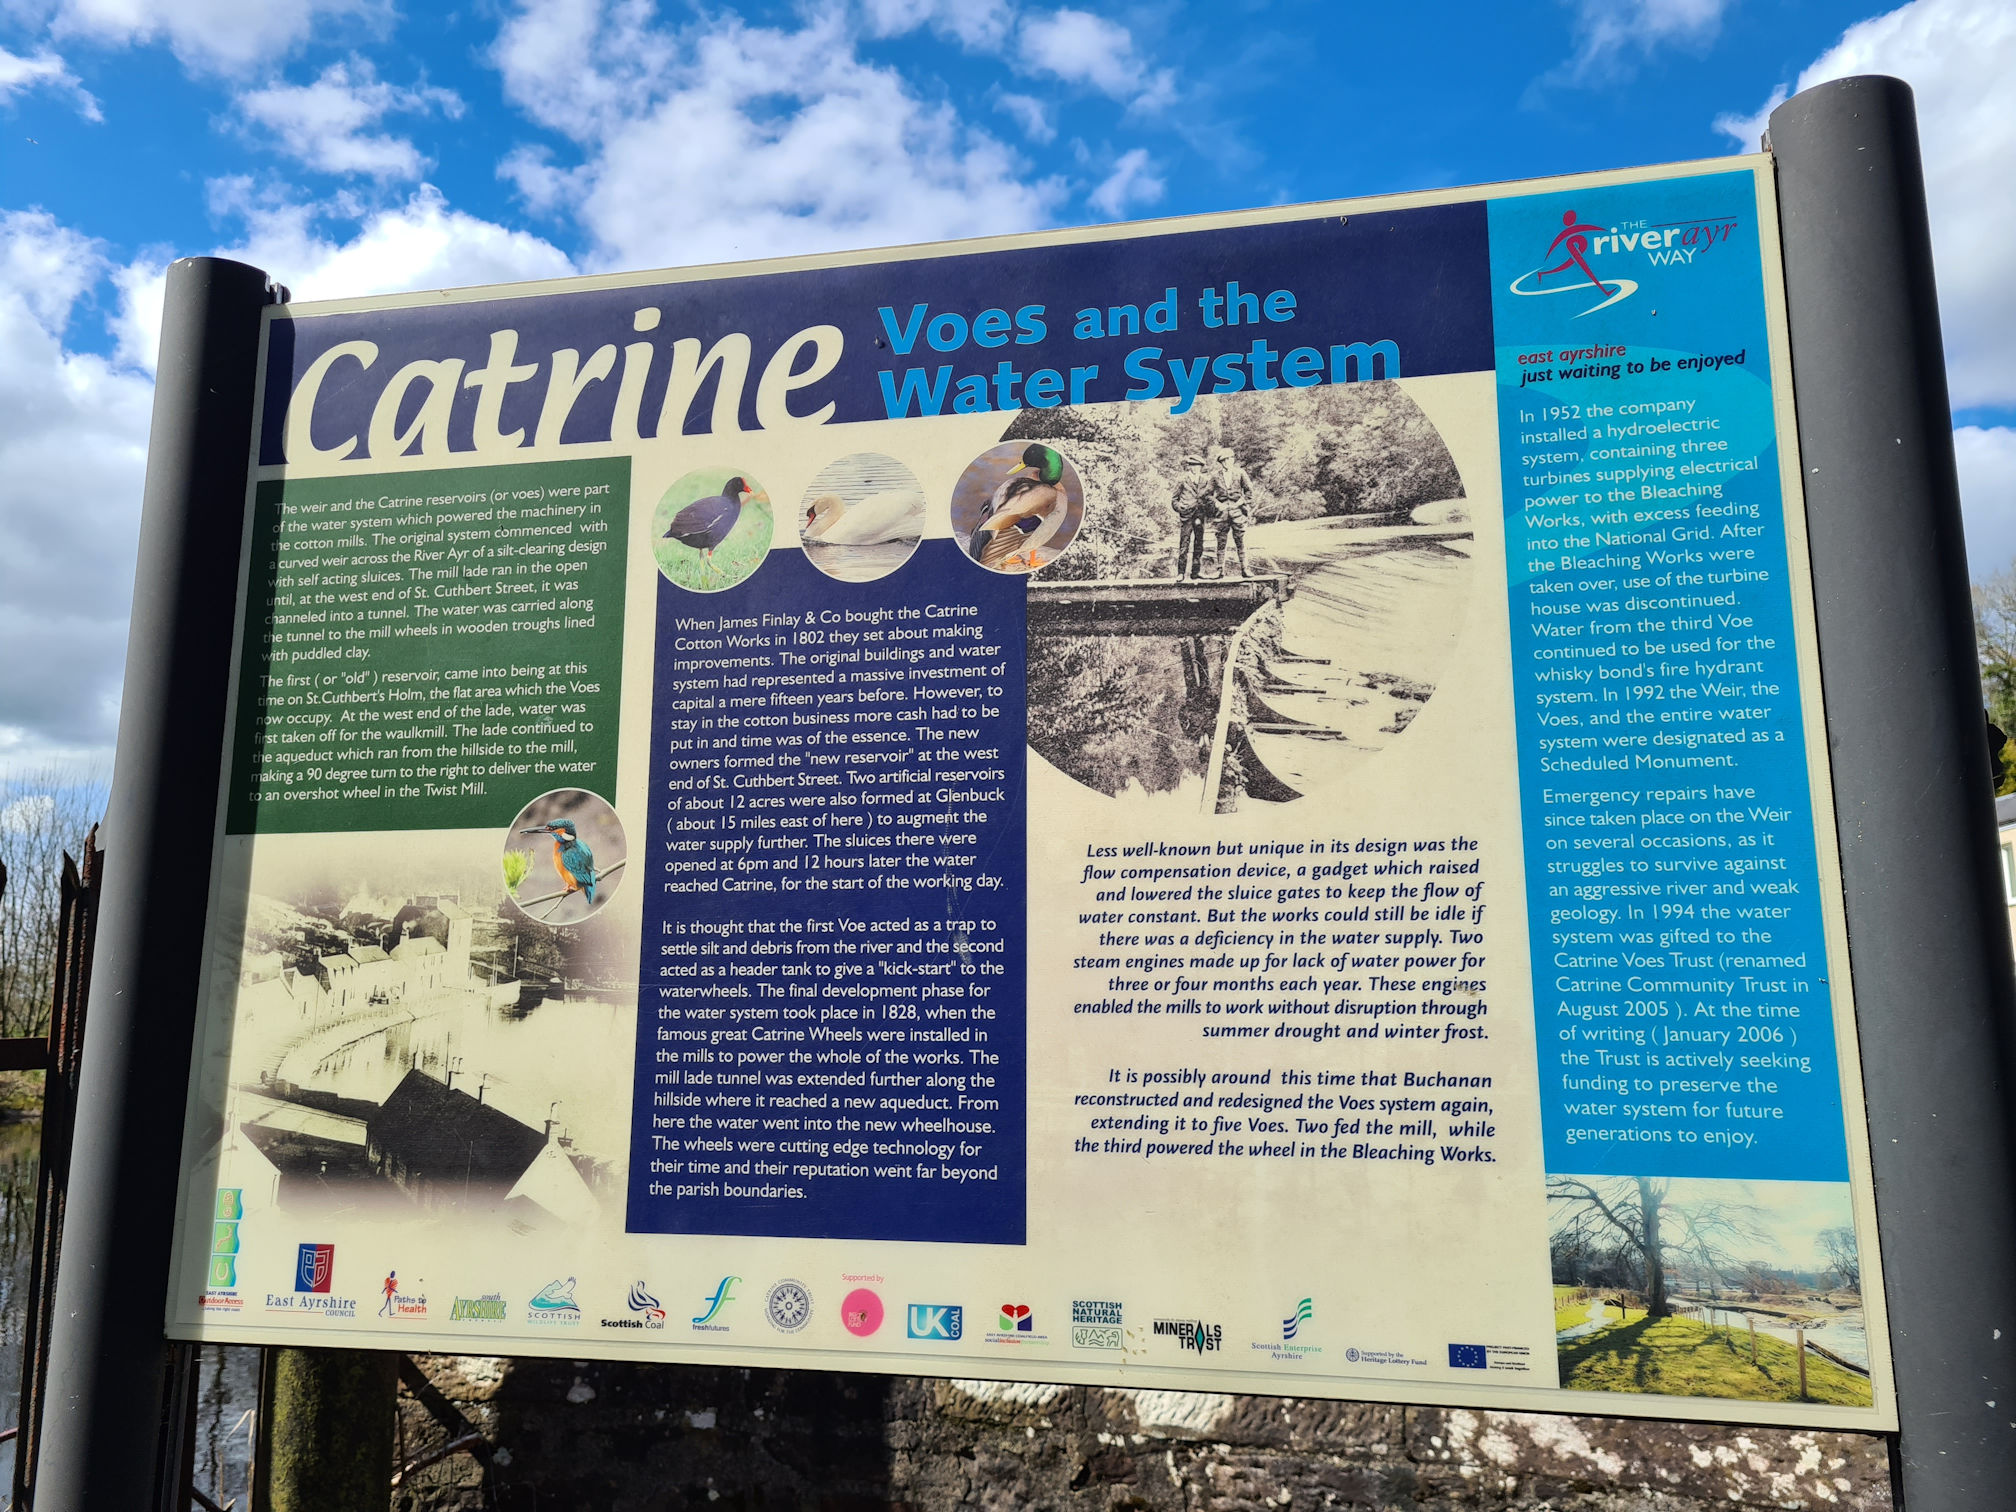 Catrine Voes and the Water System